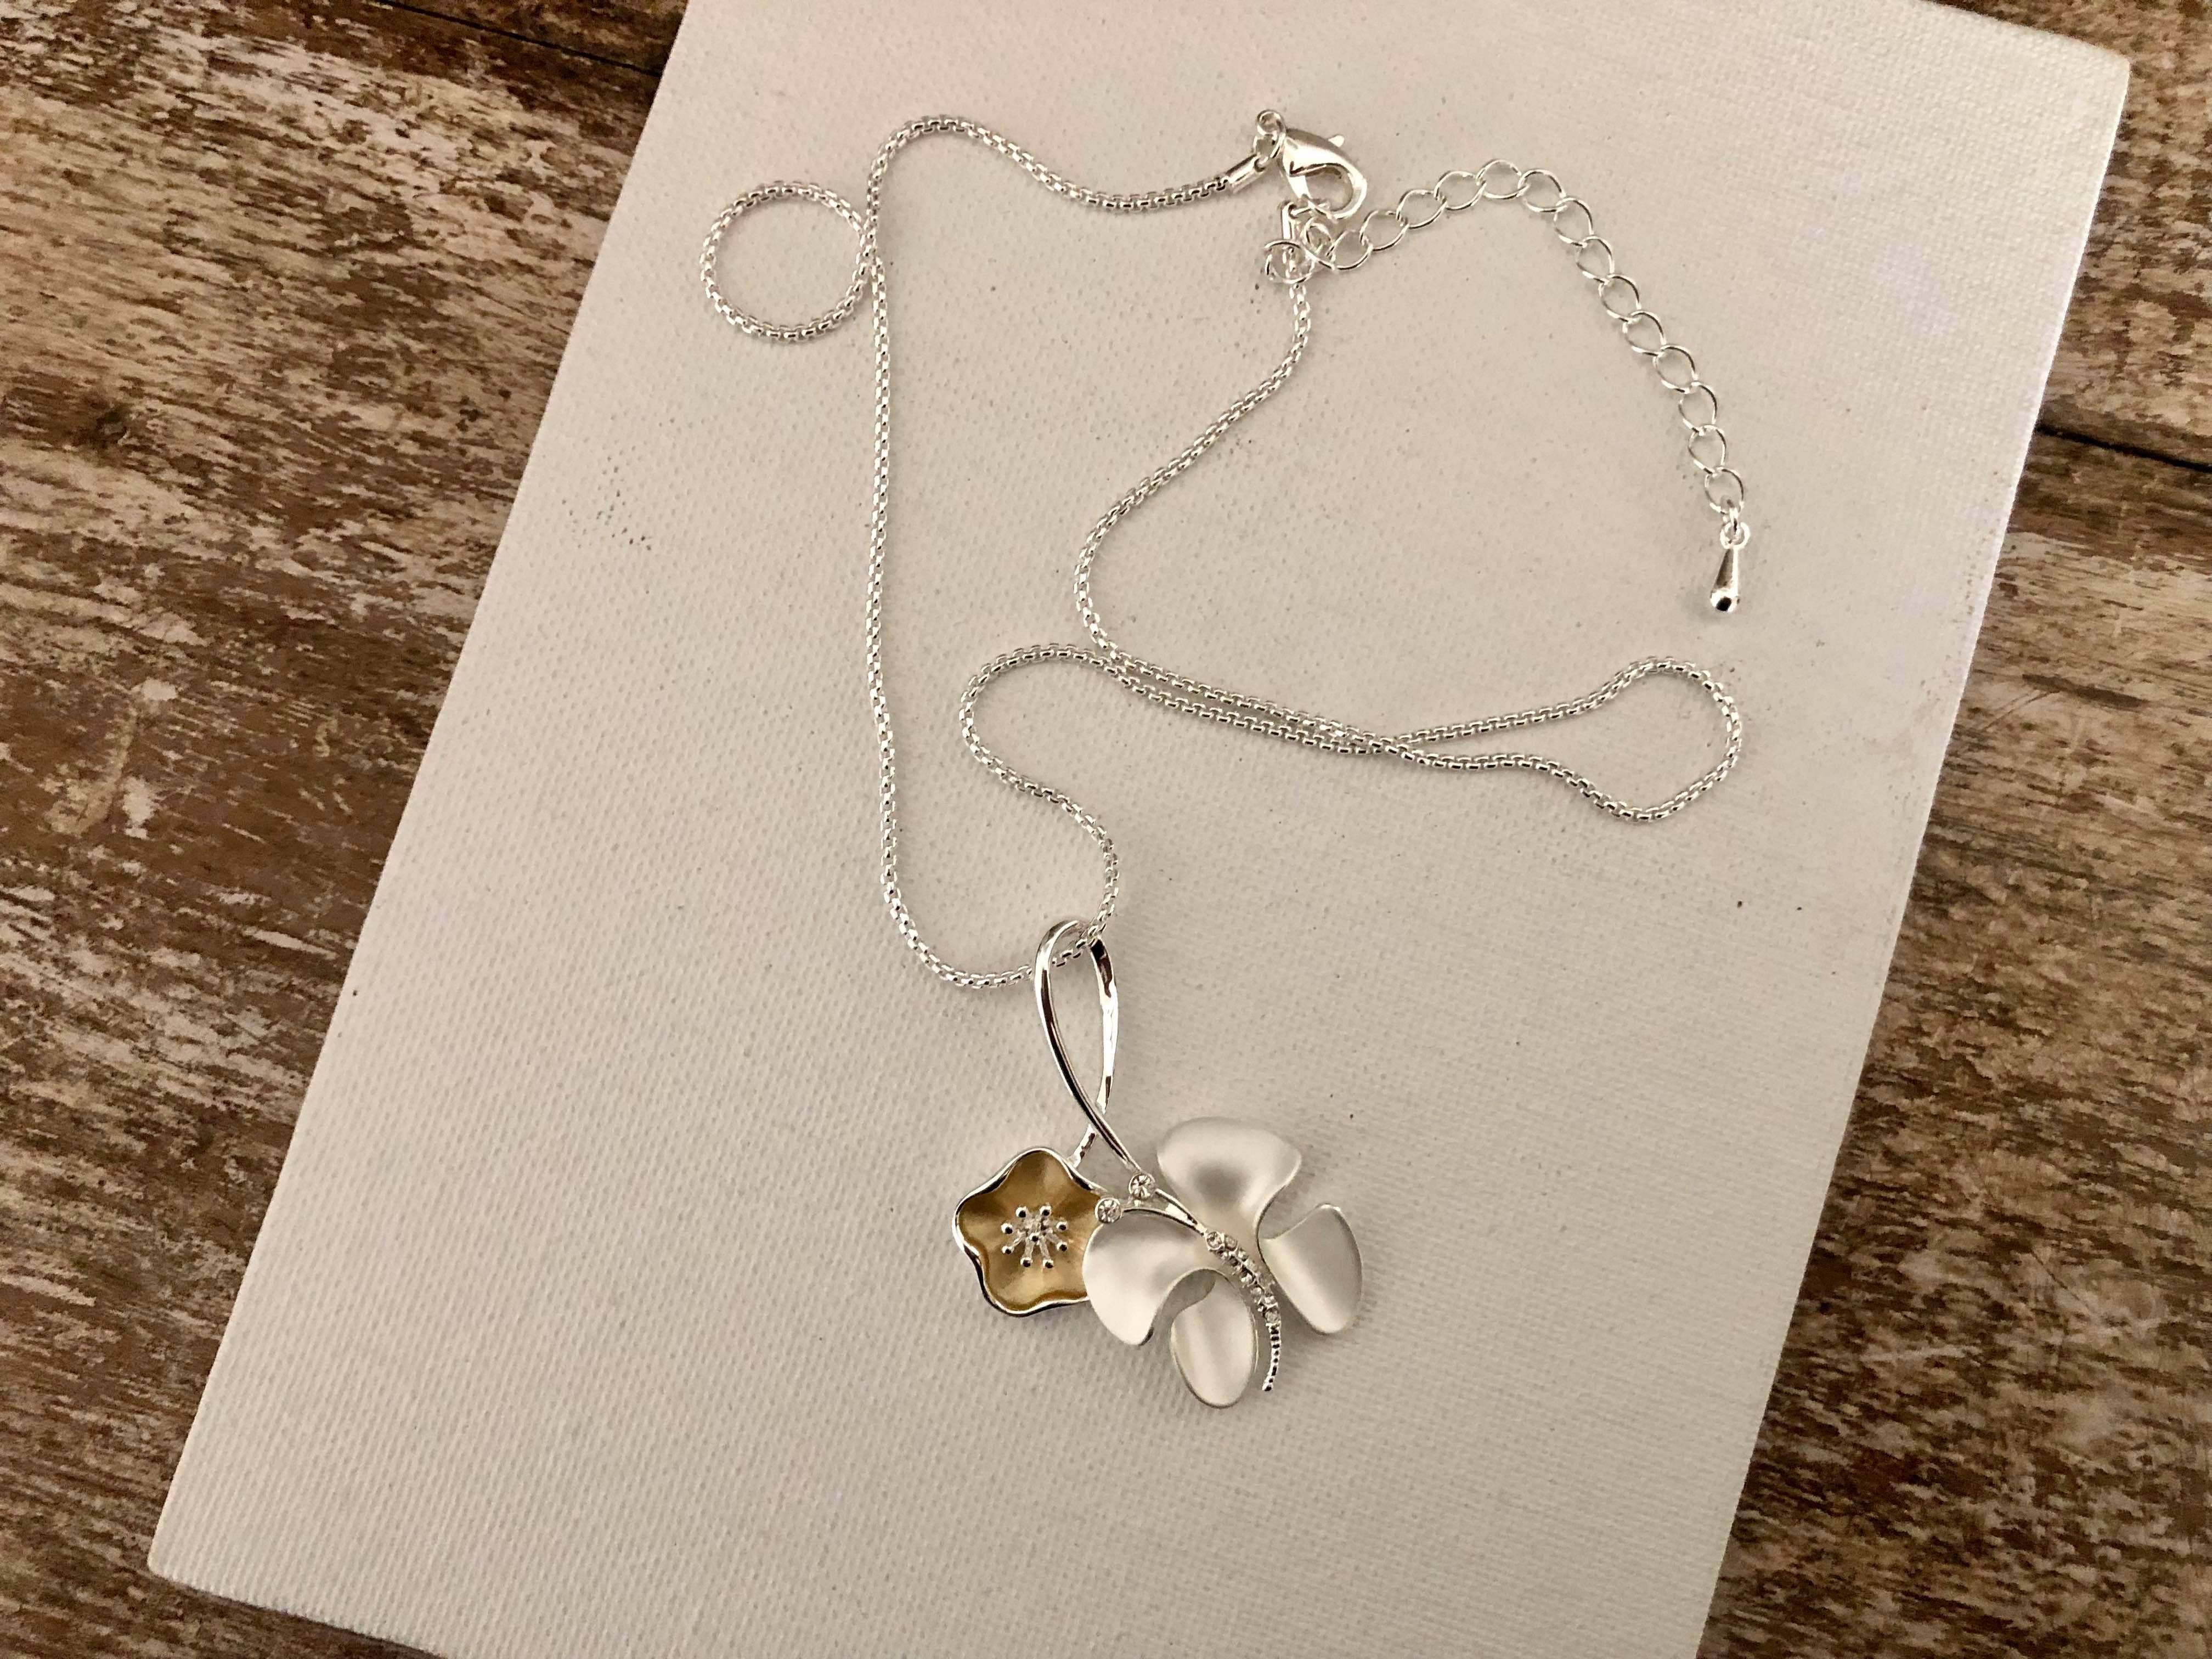 Butterfly/Flower Necklace in BOX